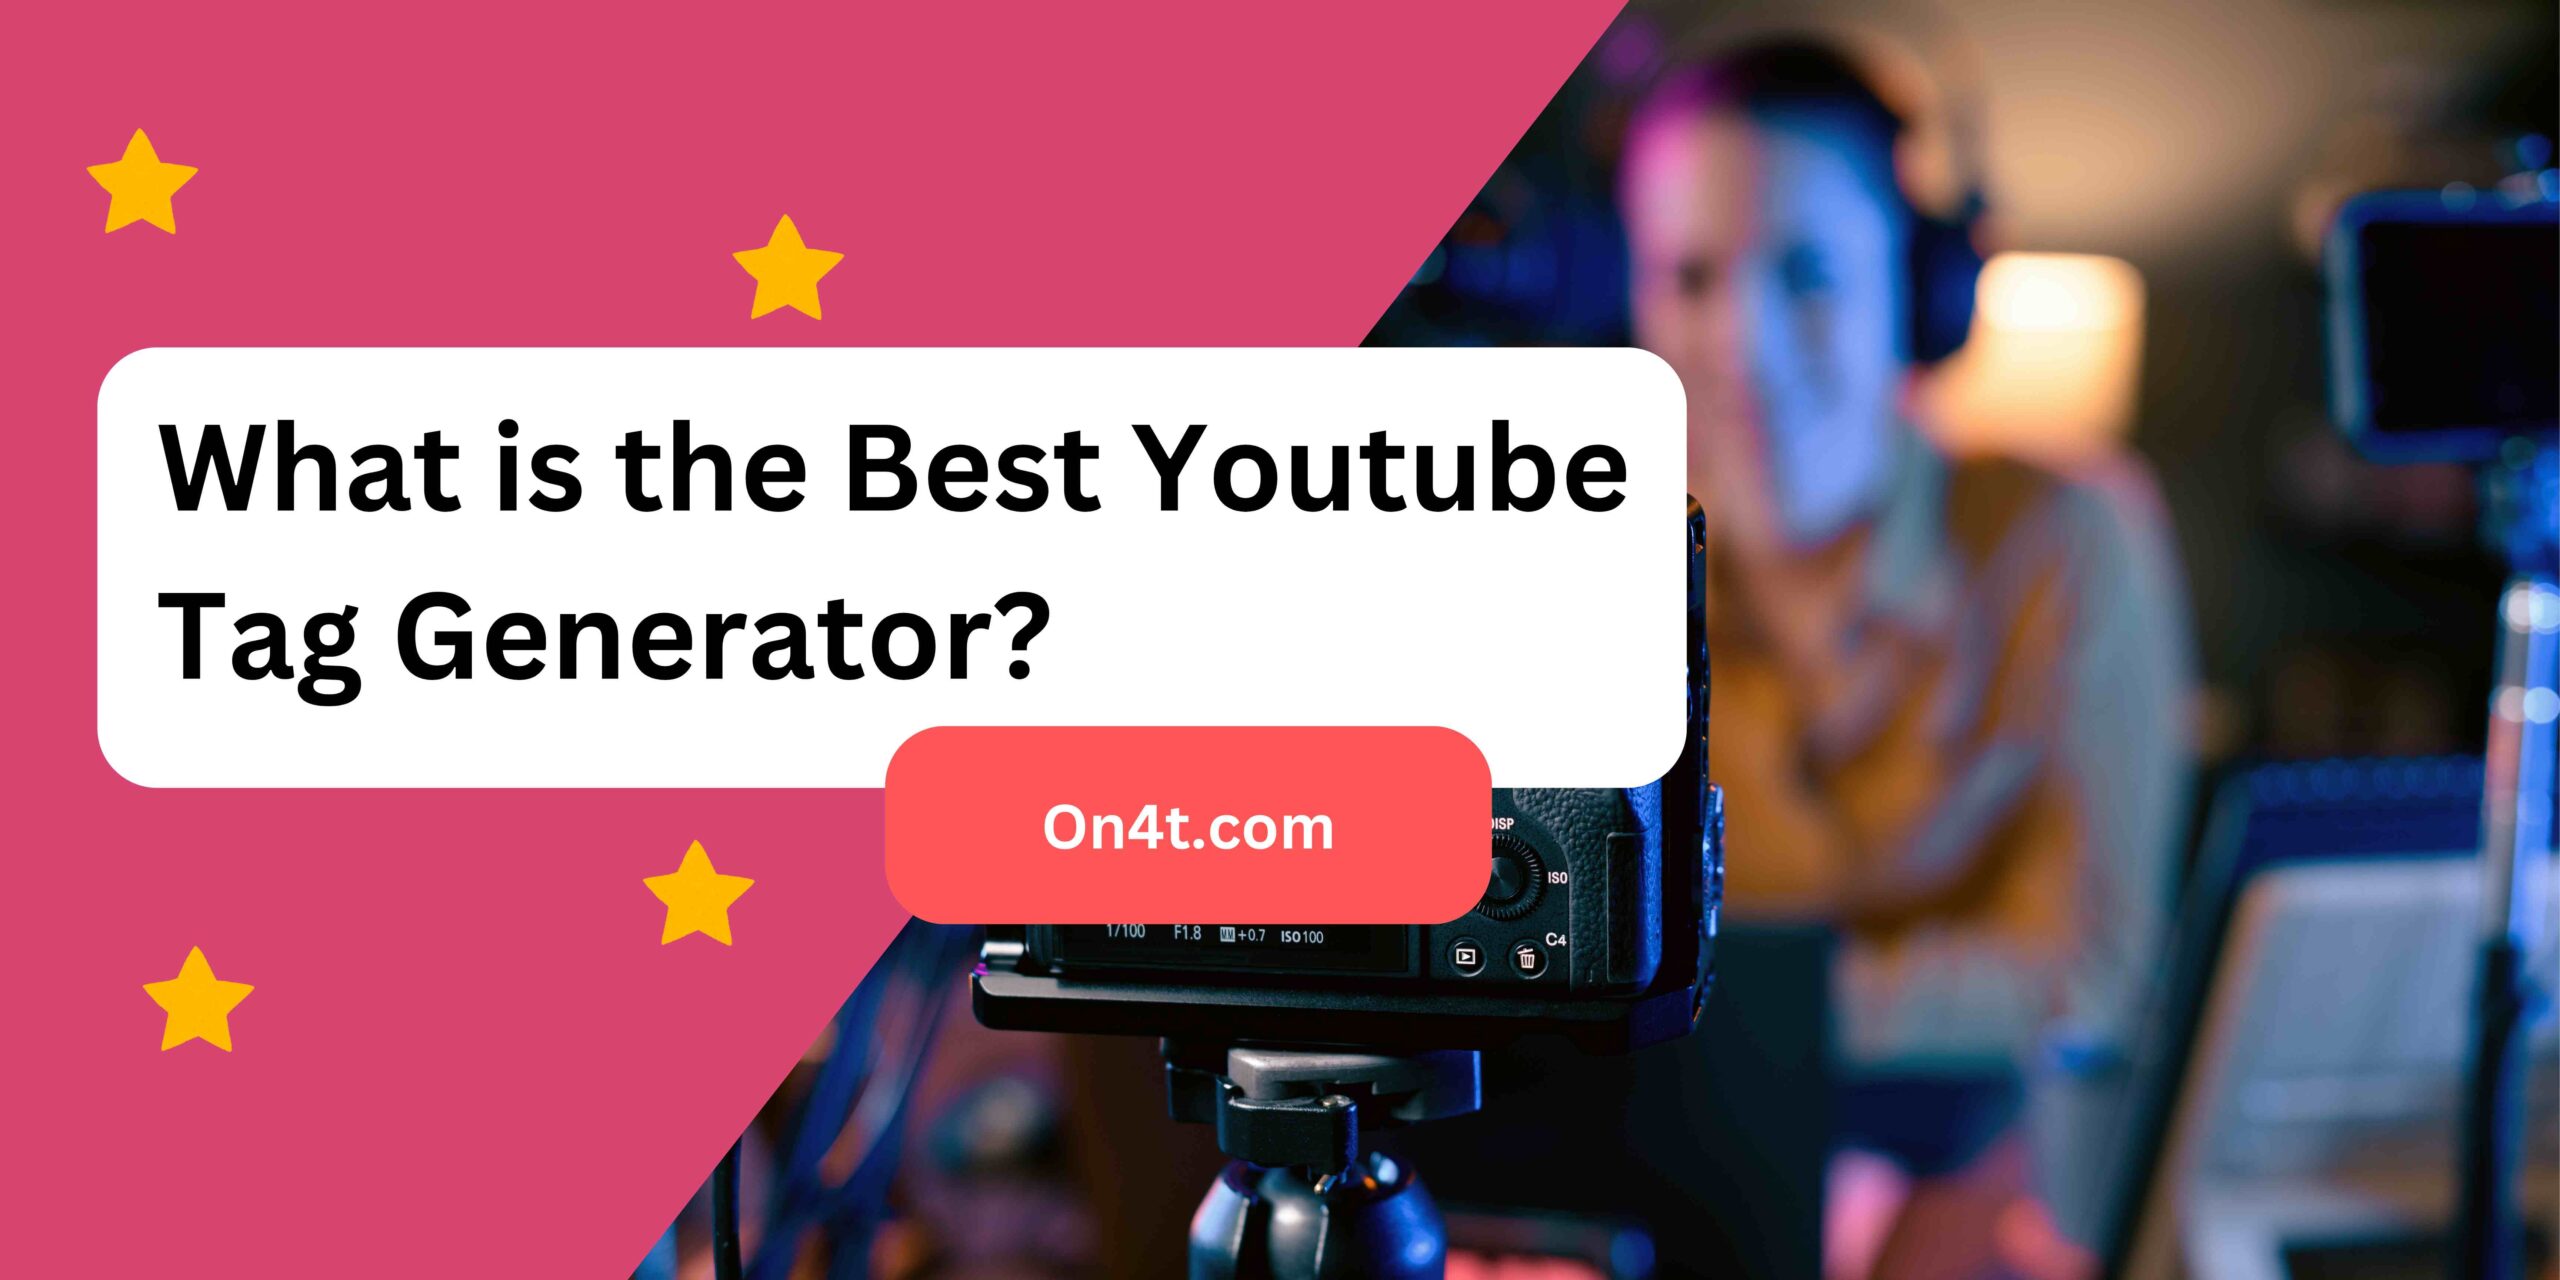 What is the Best Youtube Tag Generator?